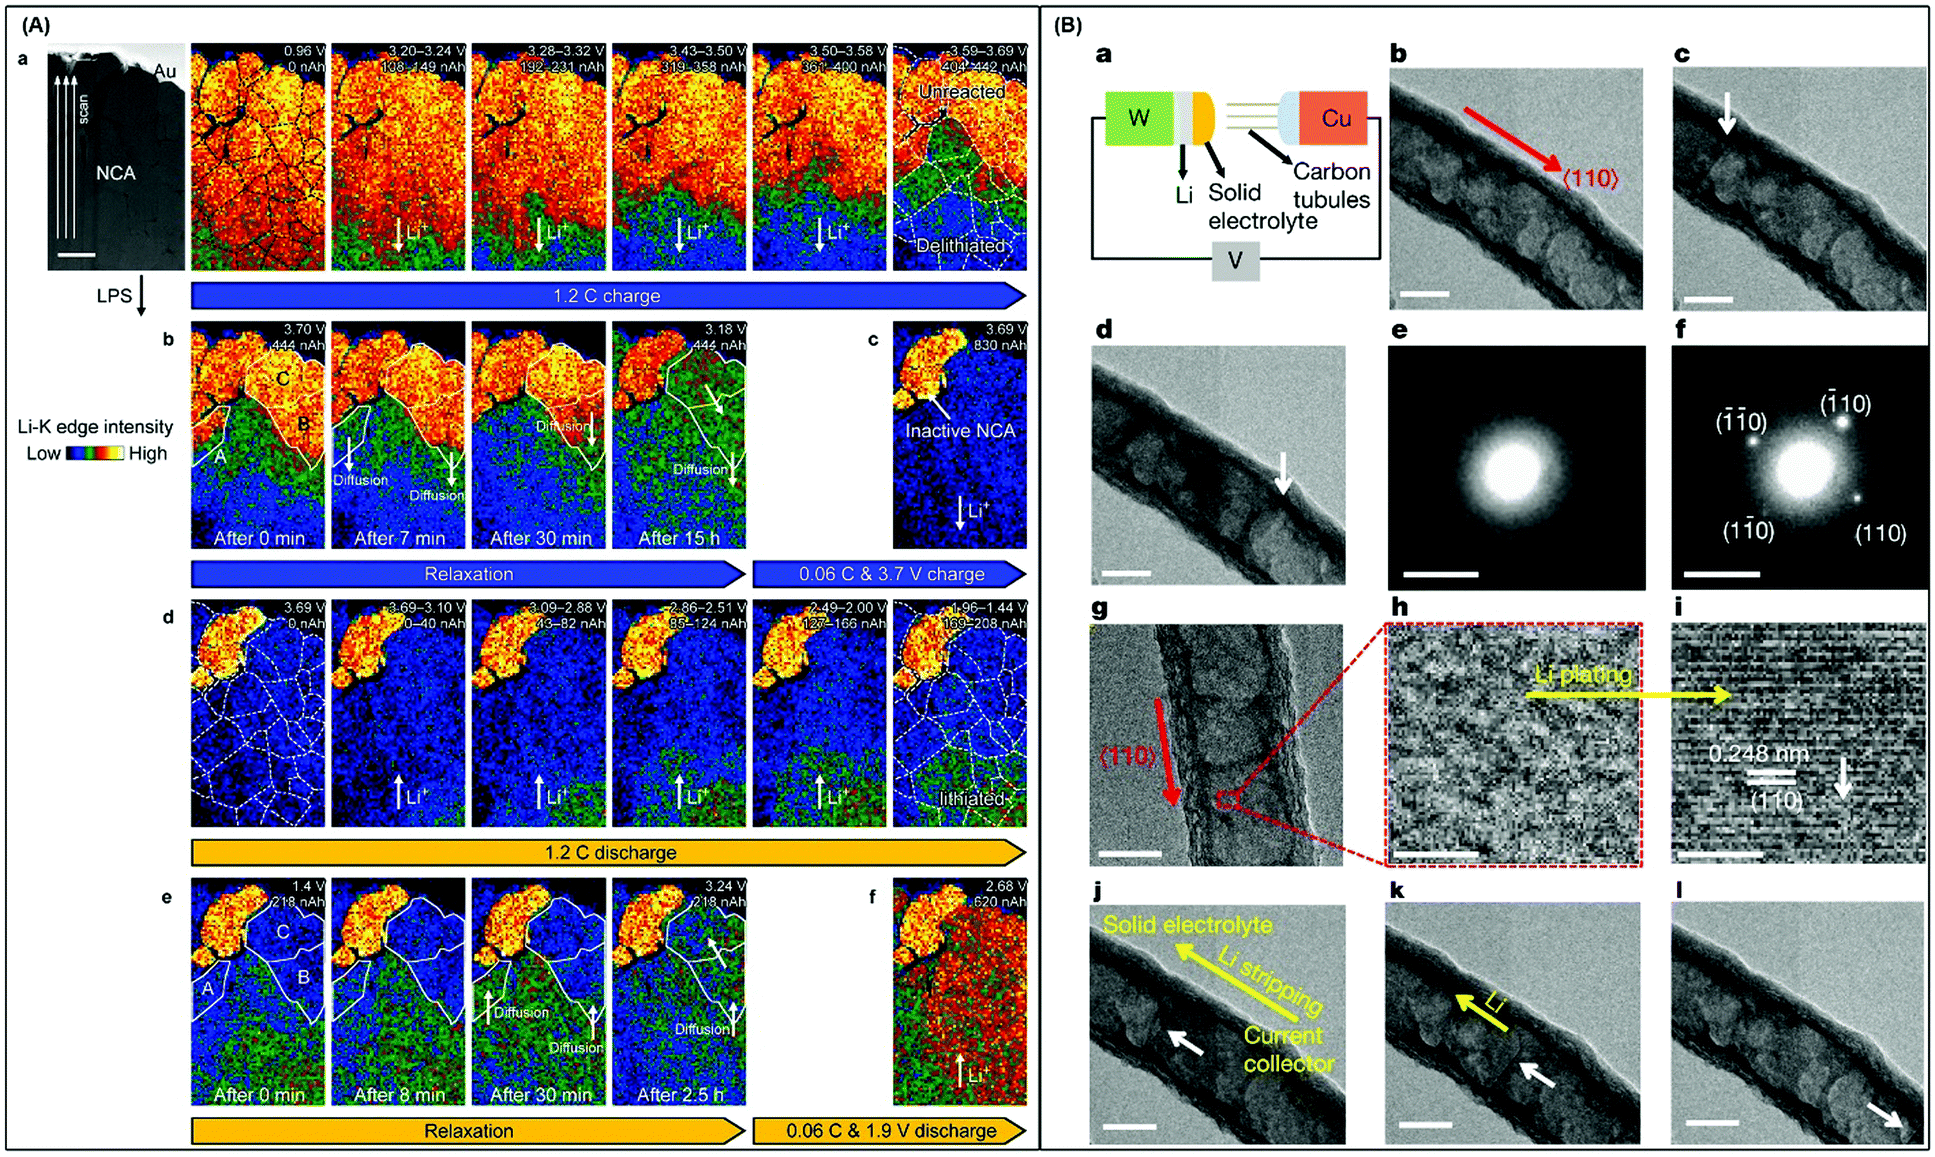 A Mechanistic Study Of Electrode Materials For Rechargeable Batteries Beyond Lithium Ions By In Situ Transmission Electron Microscopy Energy Environmental Science Rsc Publishing Doi 10 1039 D0eef